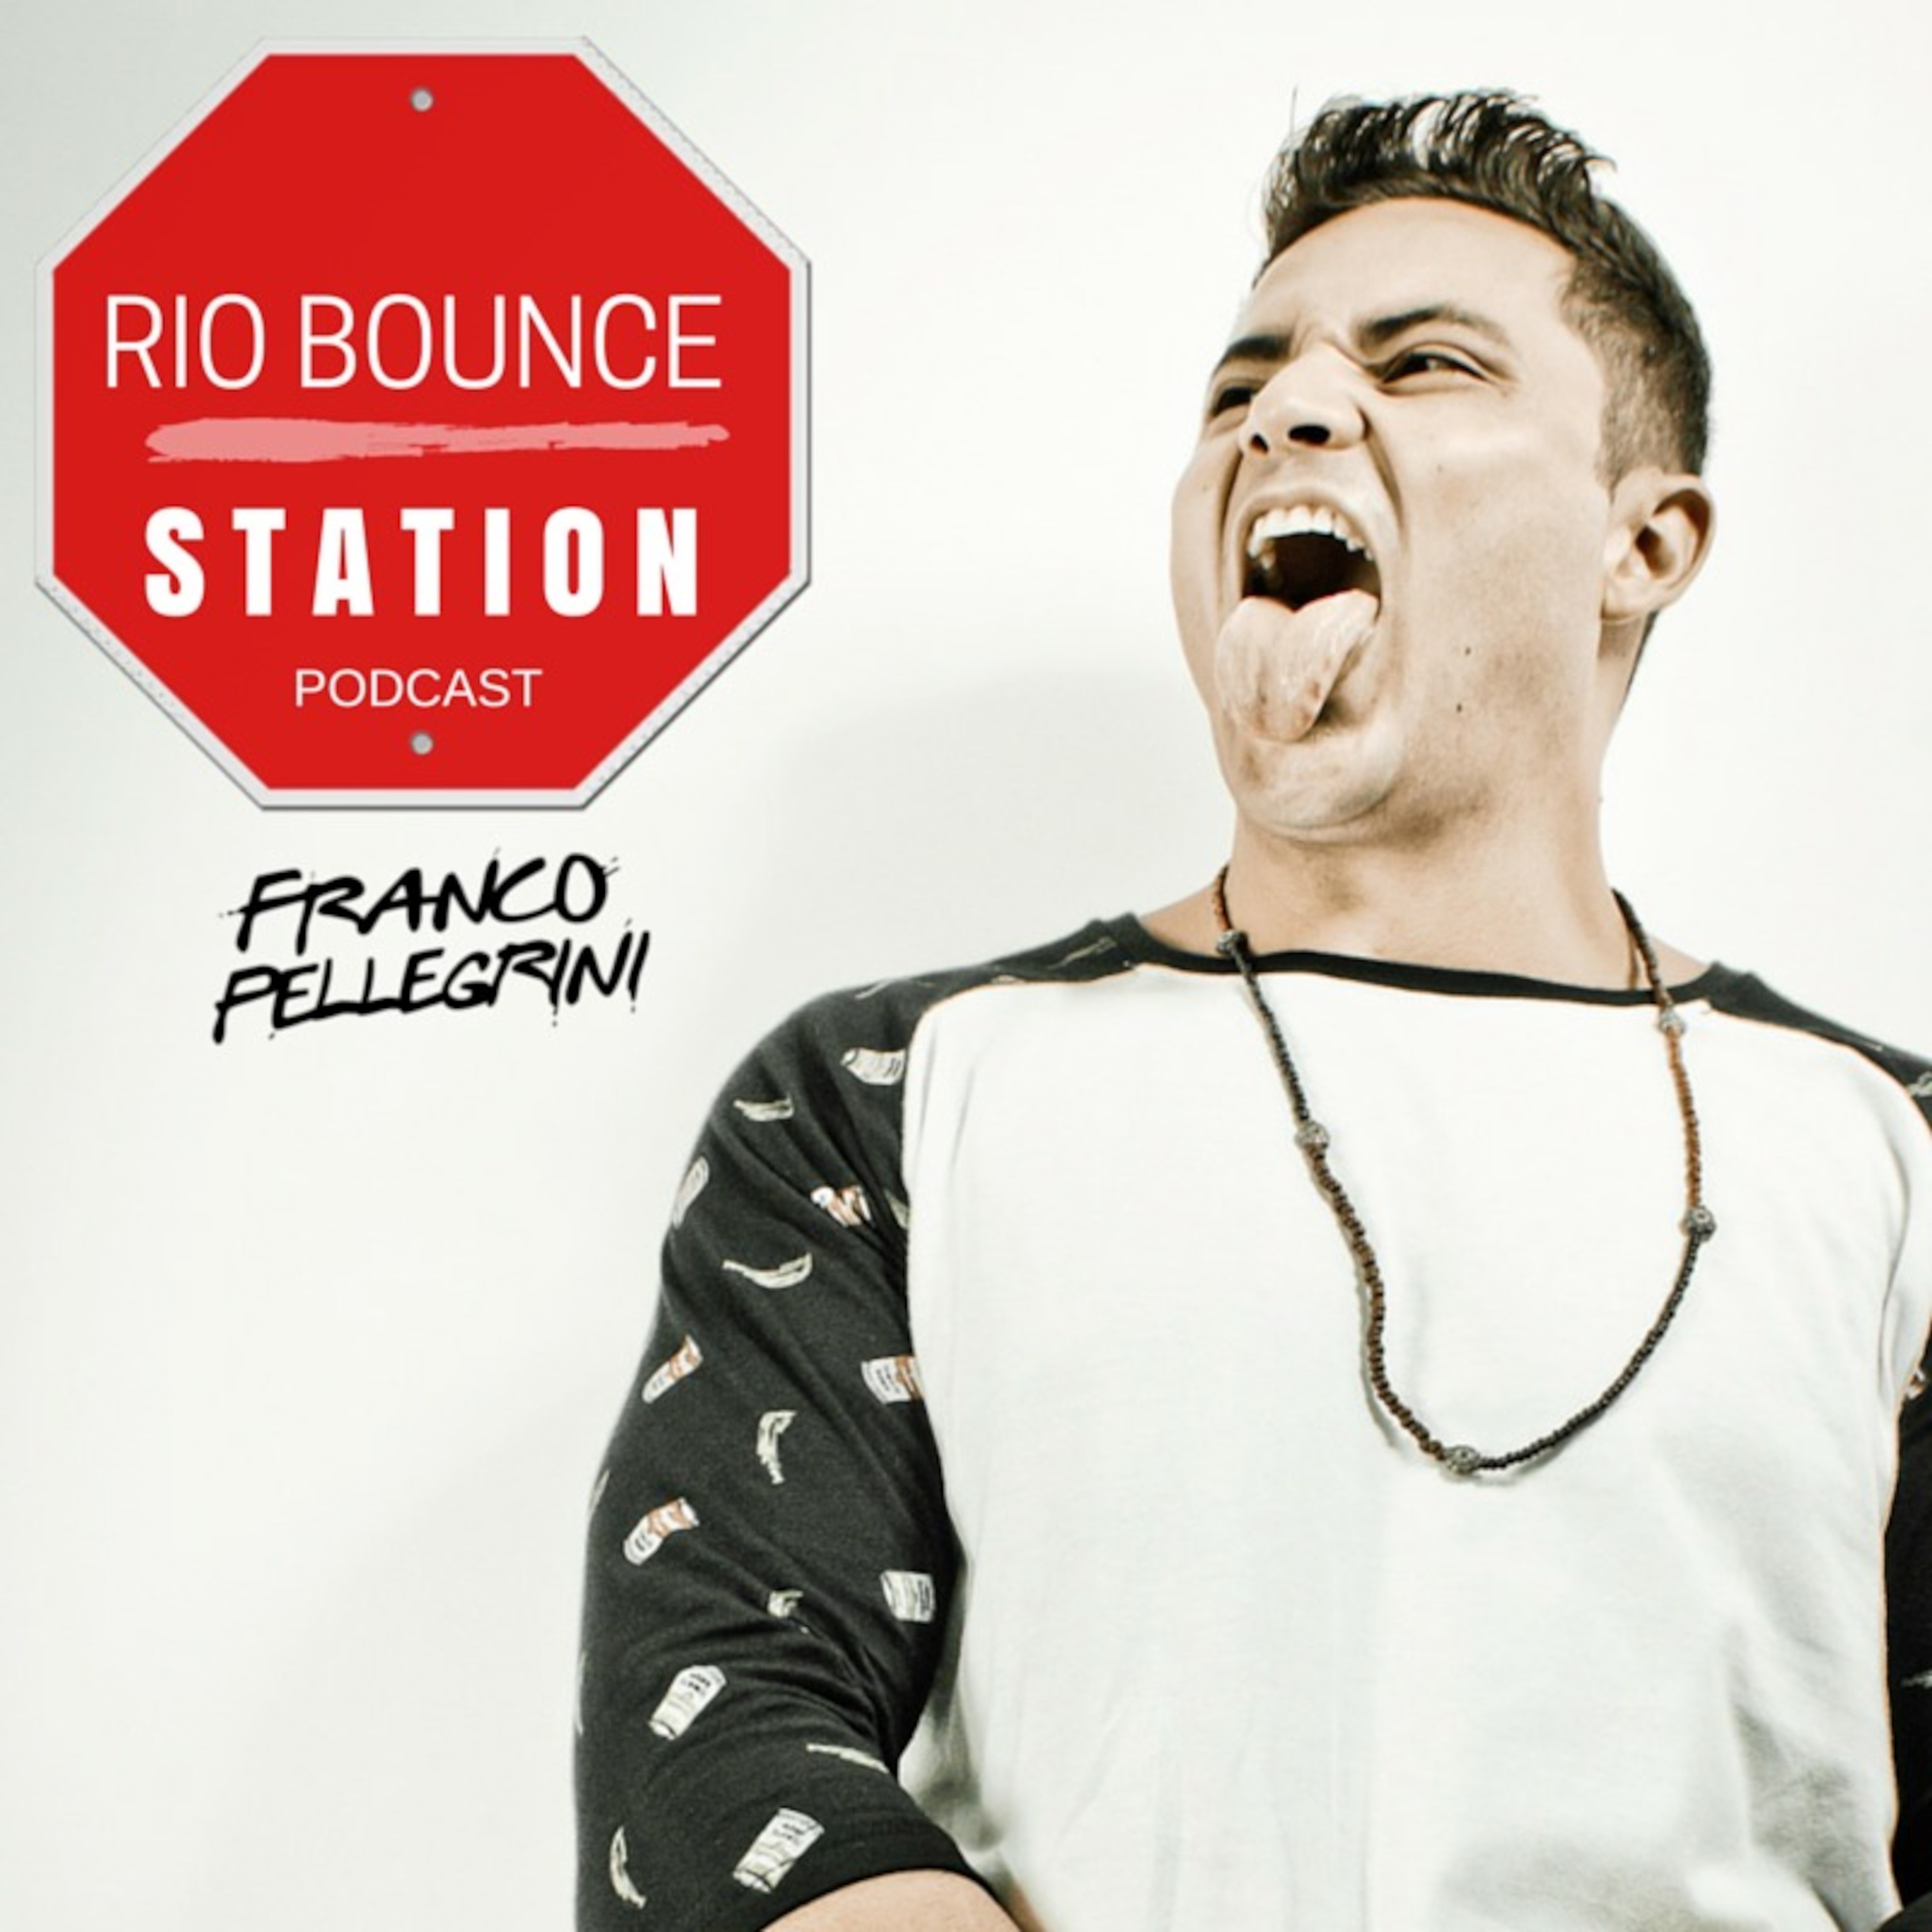 Rio Bounce Station